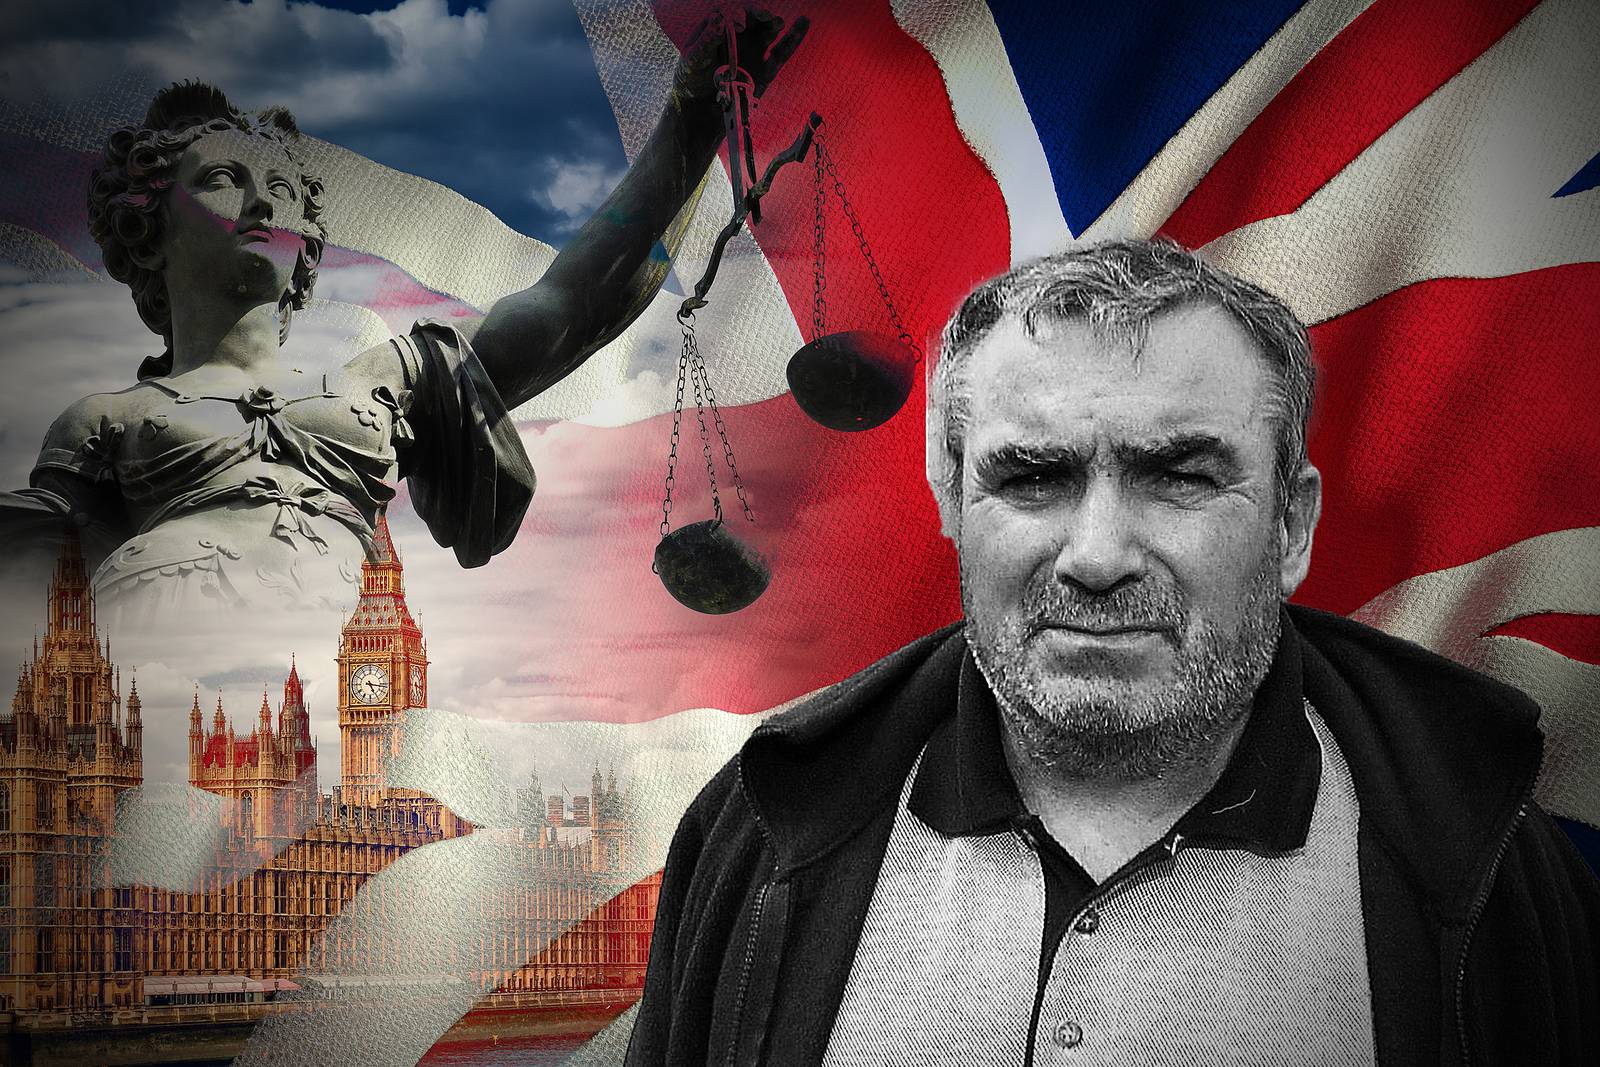 independent report on the high-ranking double agent Stakeknife - widely identified as senior Belfast IRA member Freddie Scappaticci - has taken seven years and cost approximately £40 million.